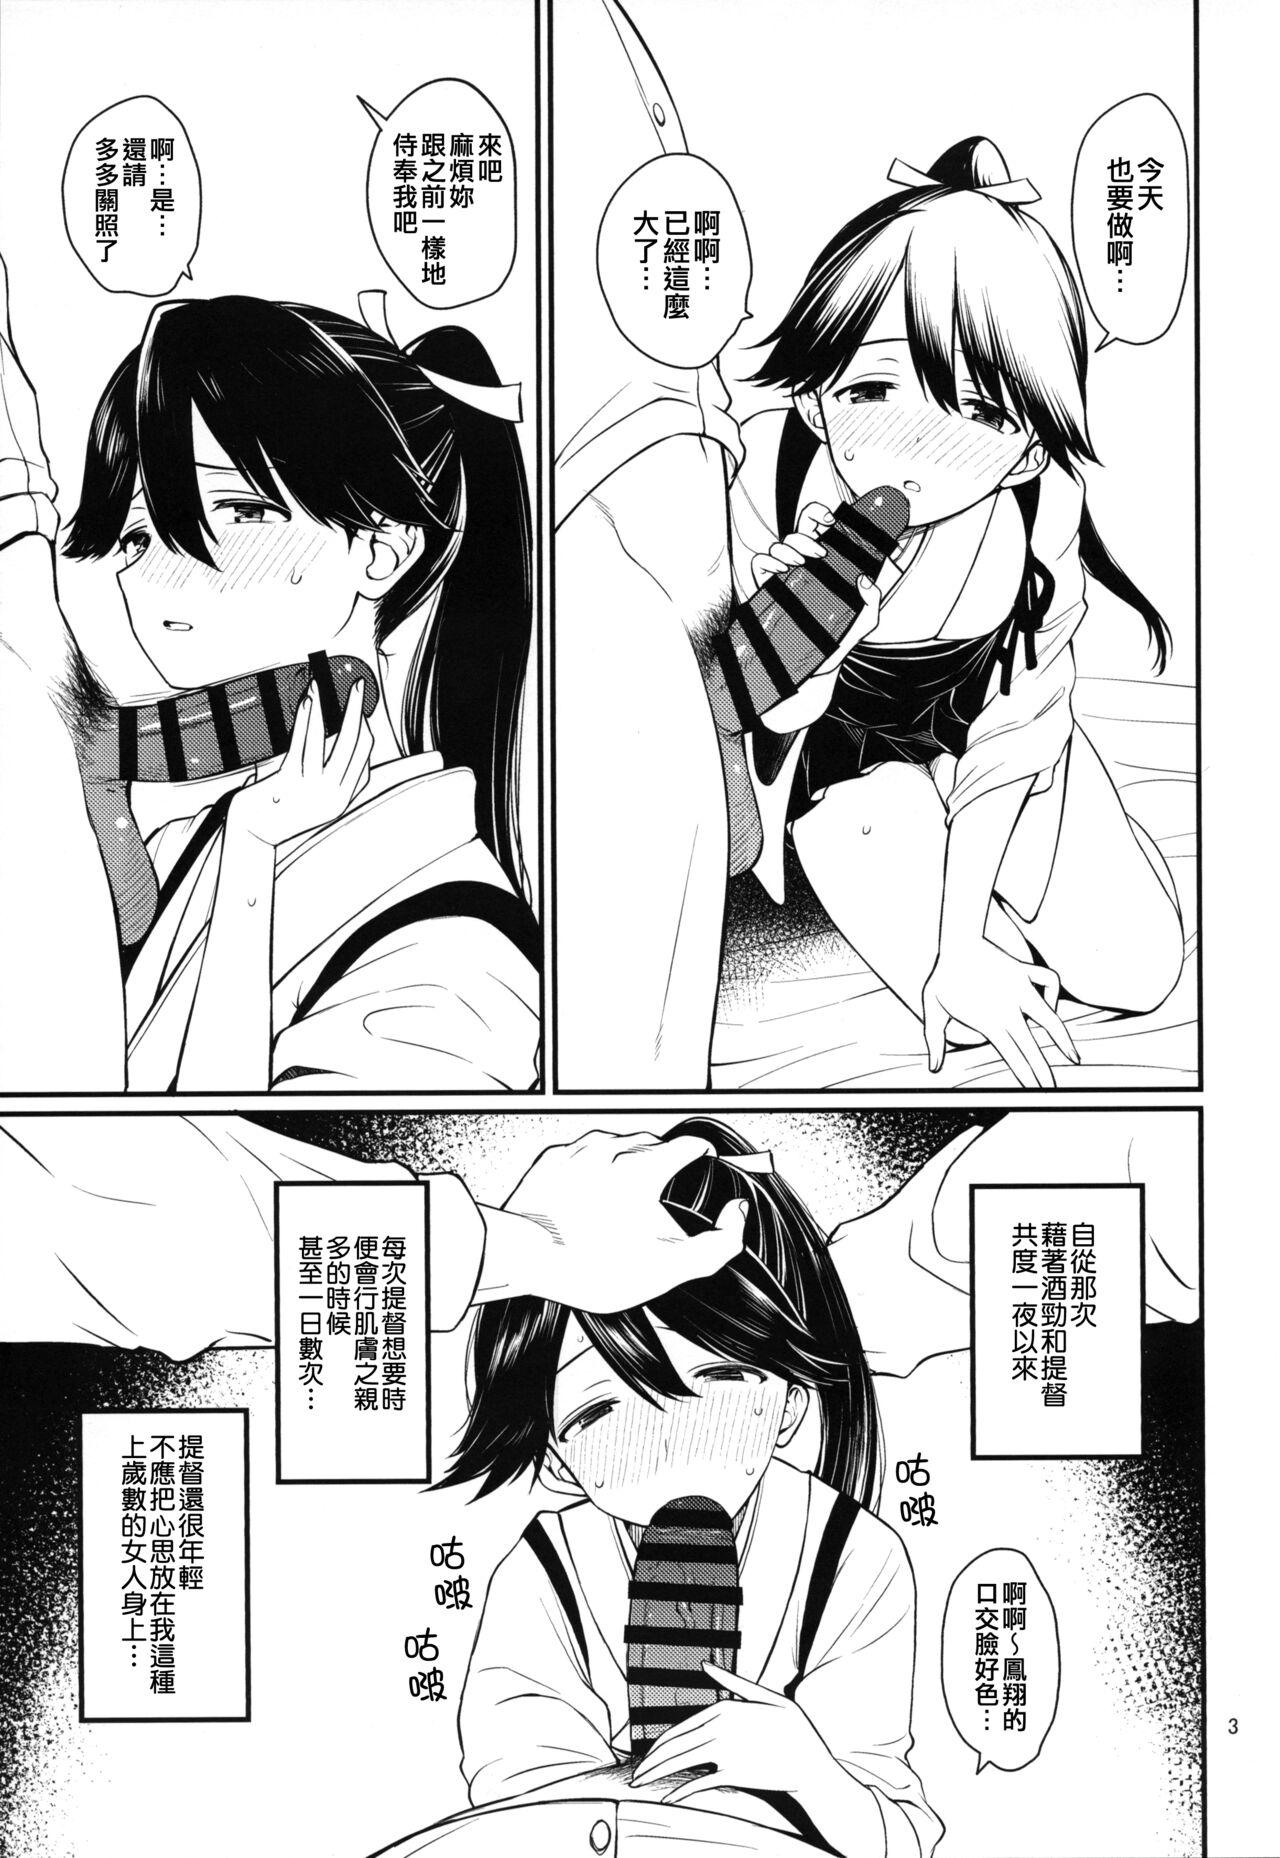 Passivo Hosho. - Kantai collection Jeans - Page 2